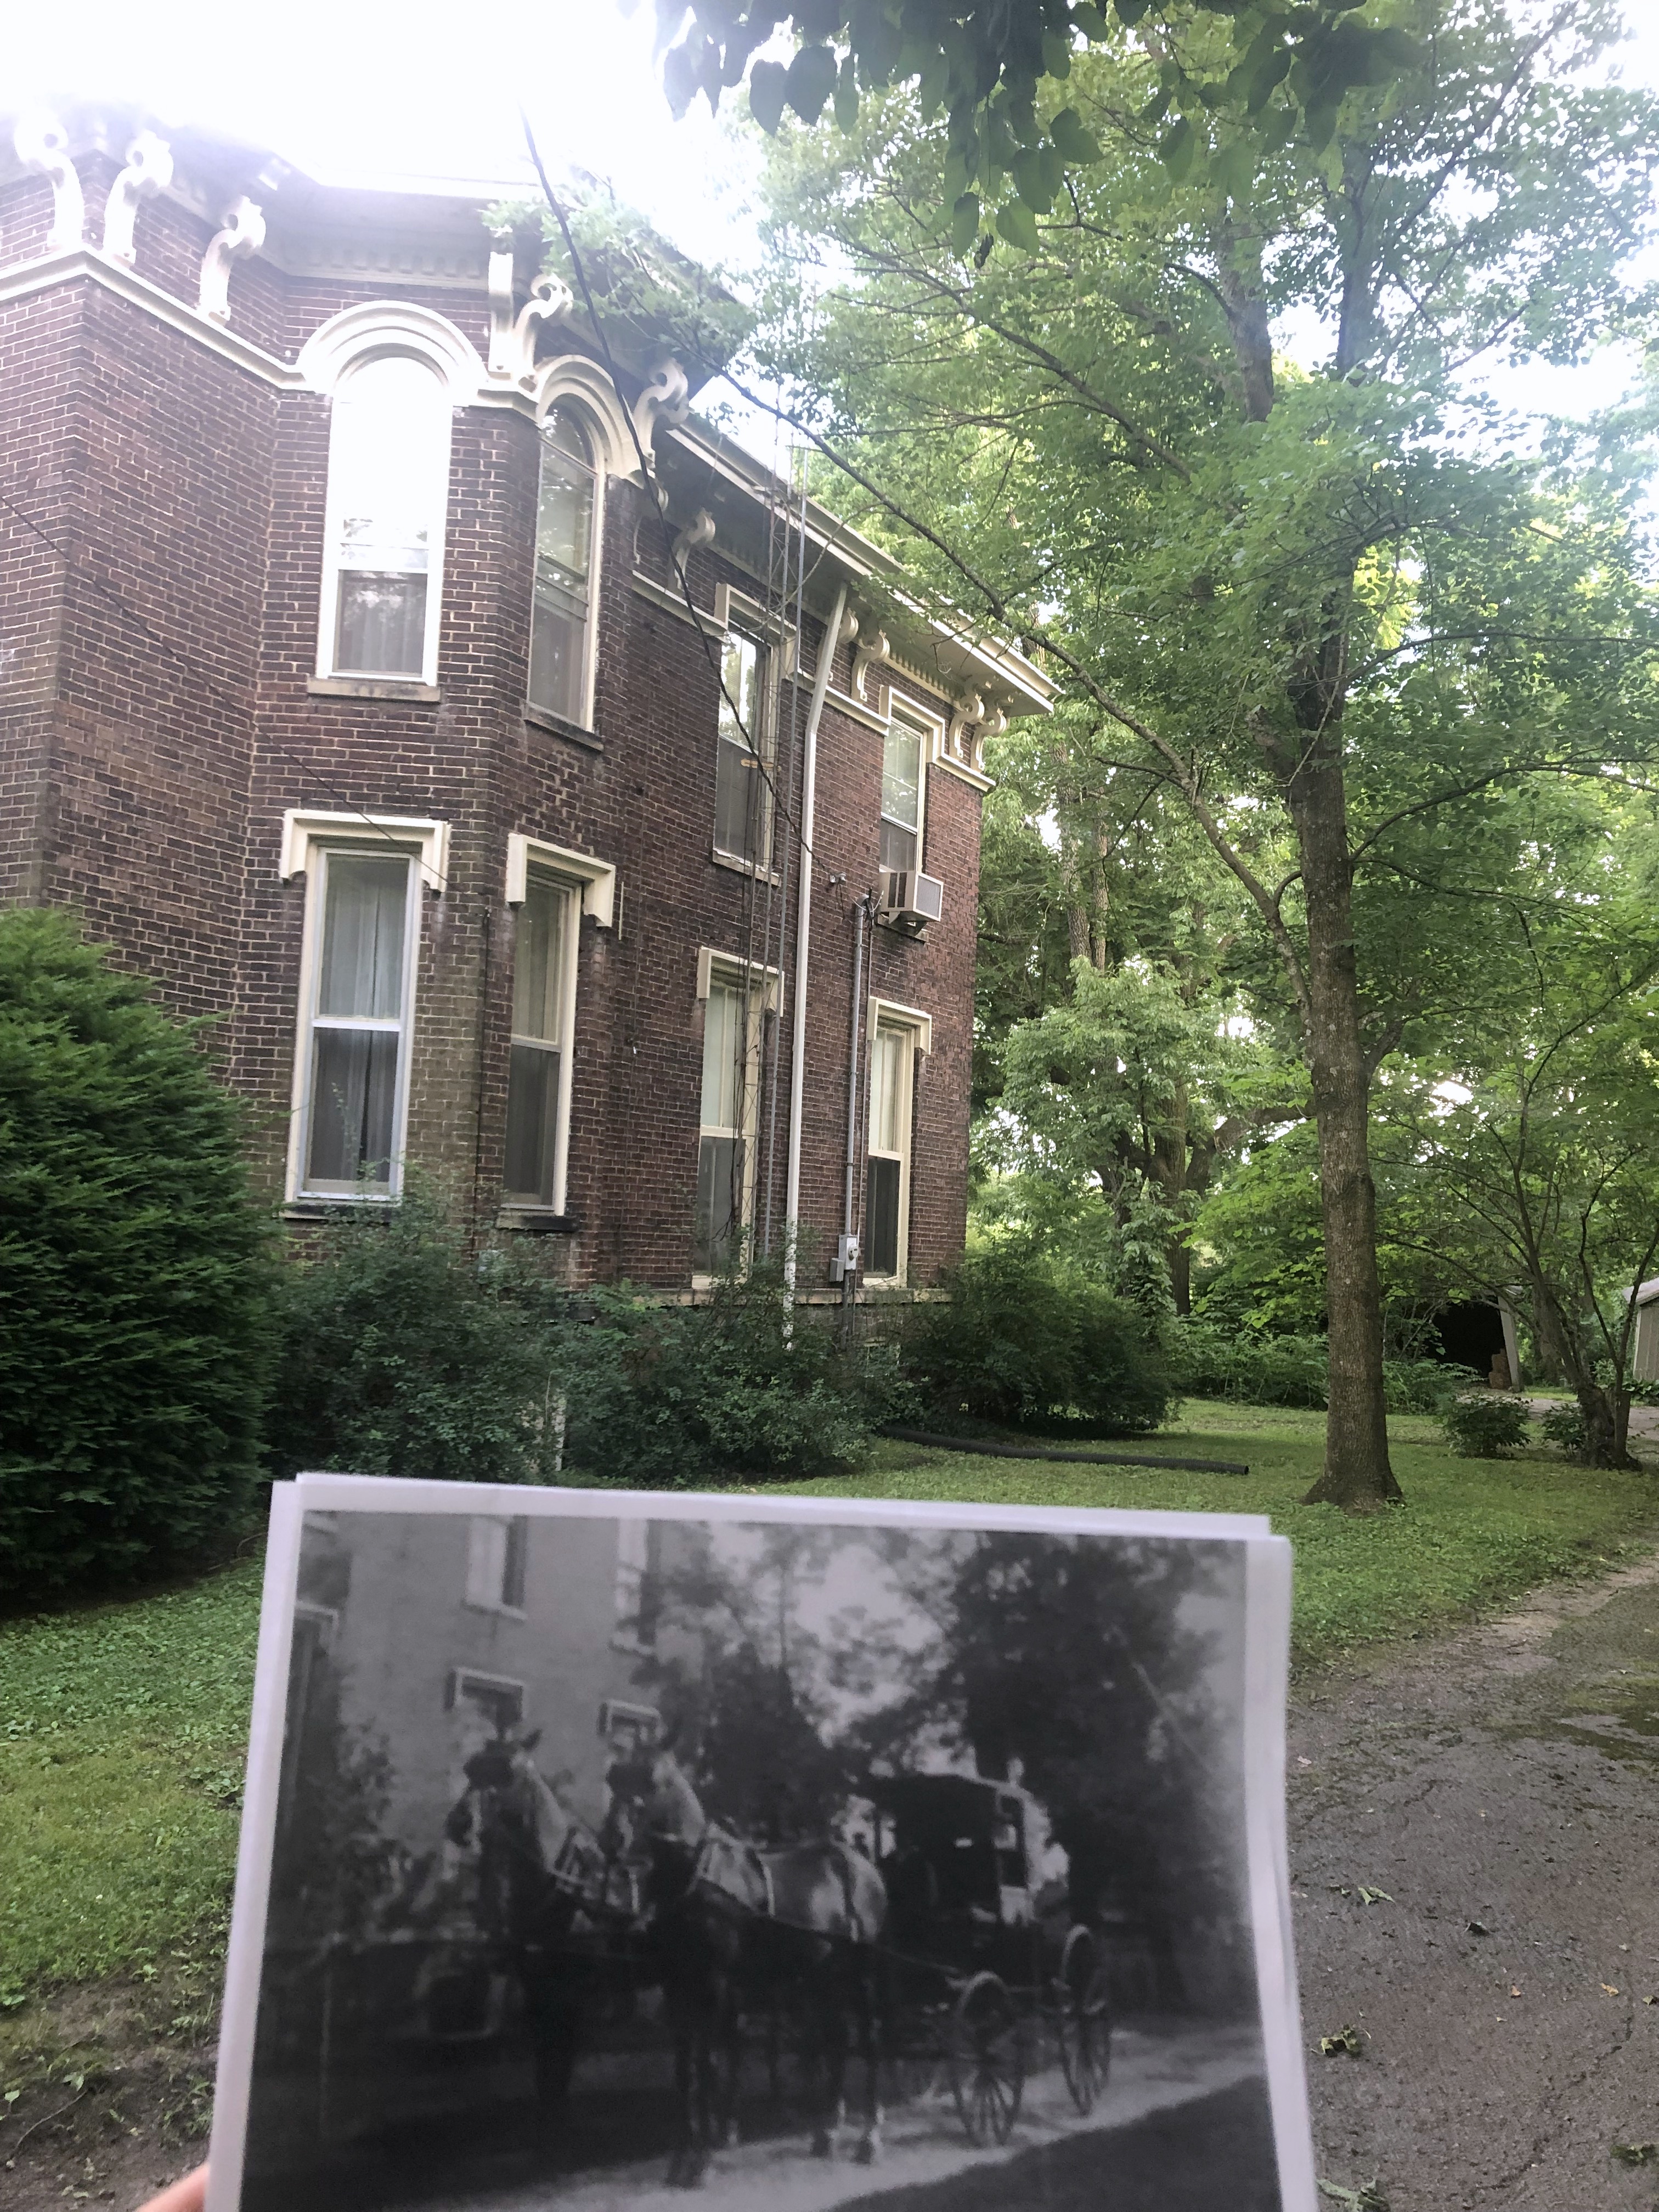 Side driveway at 151 Duncan in 1905 with horse and carriage and picture from 2019